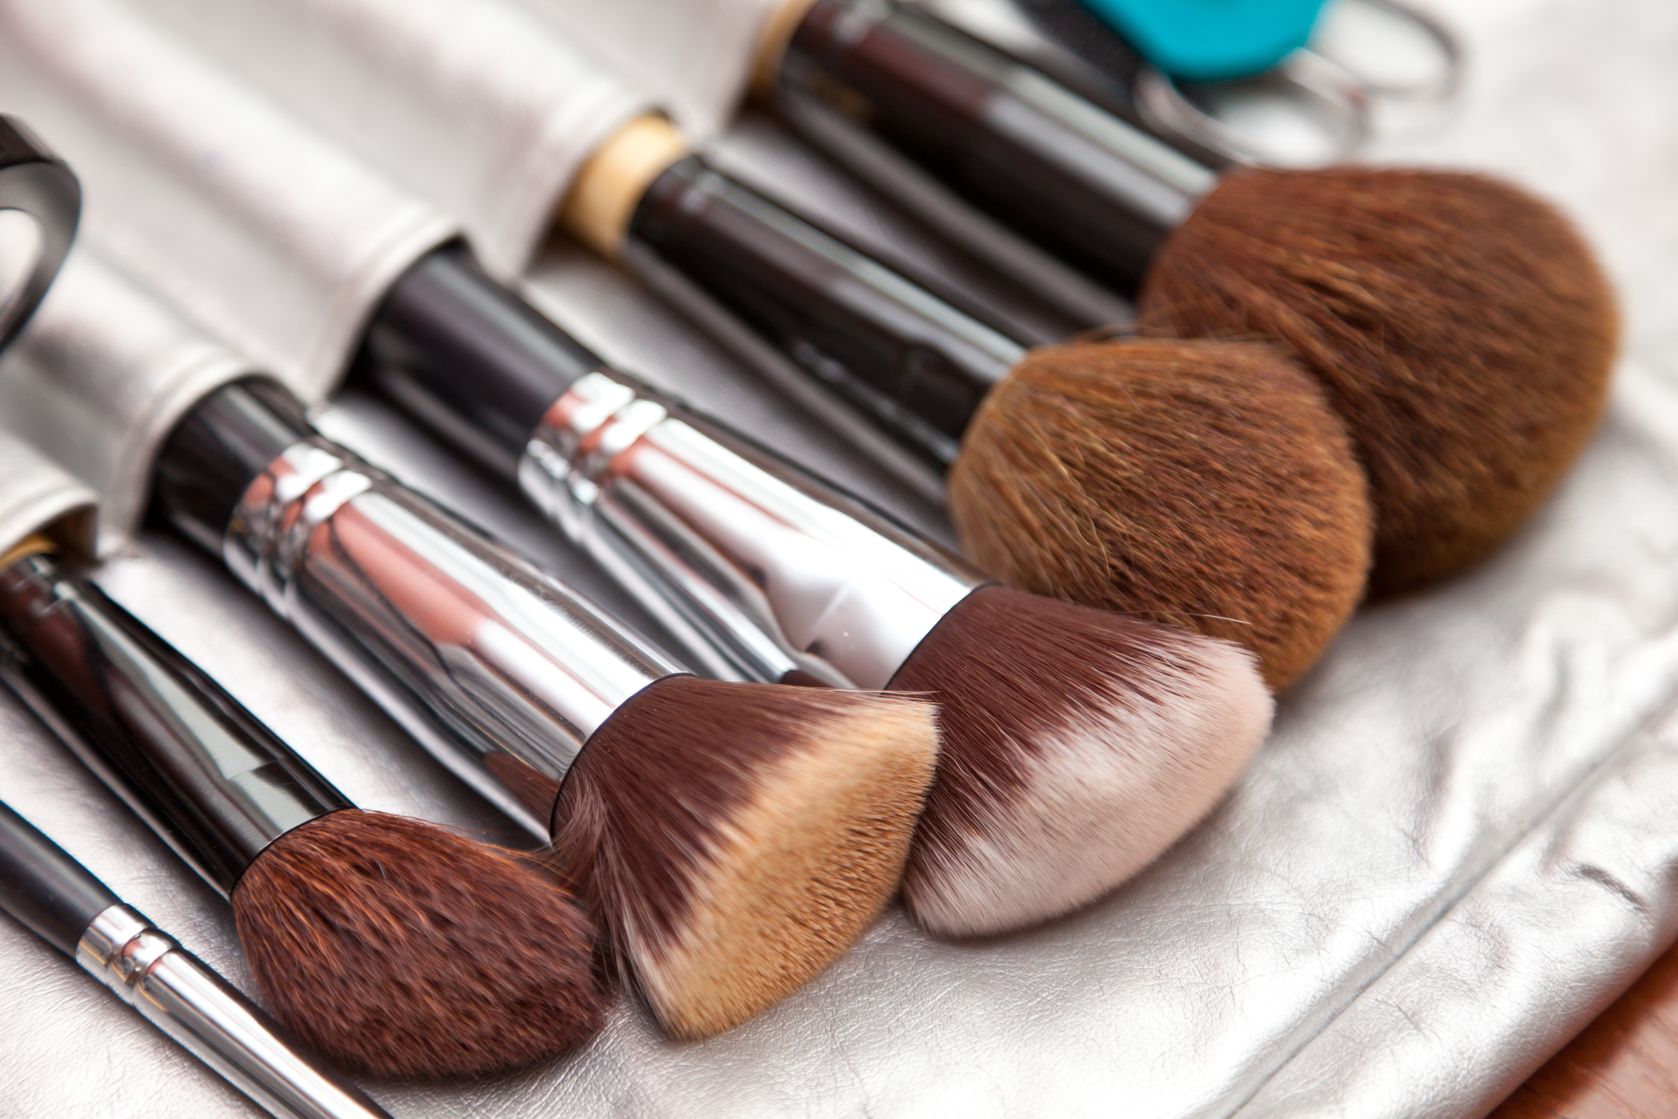 Quality makeup brushes are key to good application. 